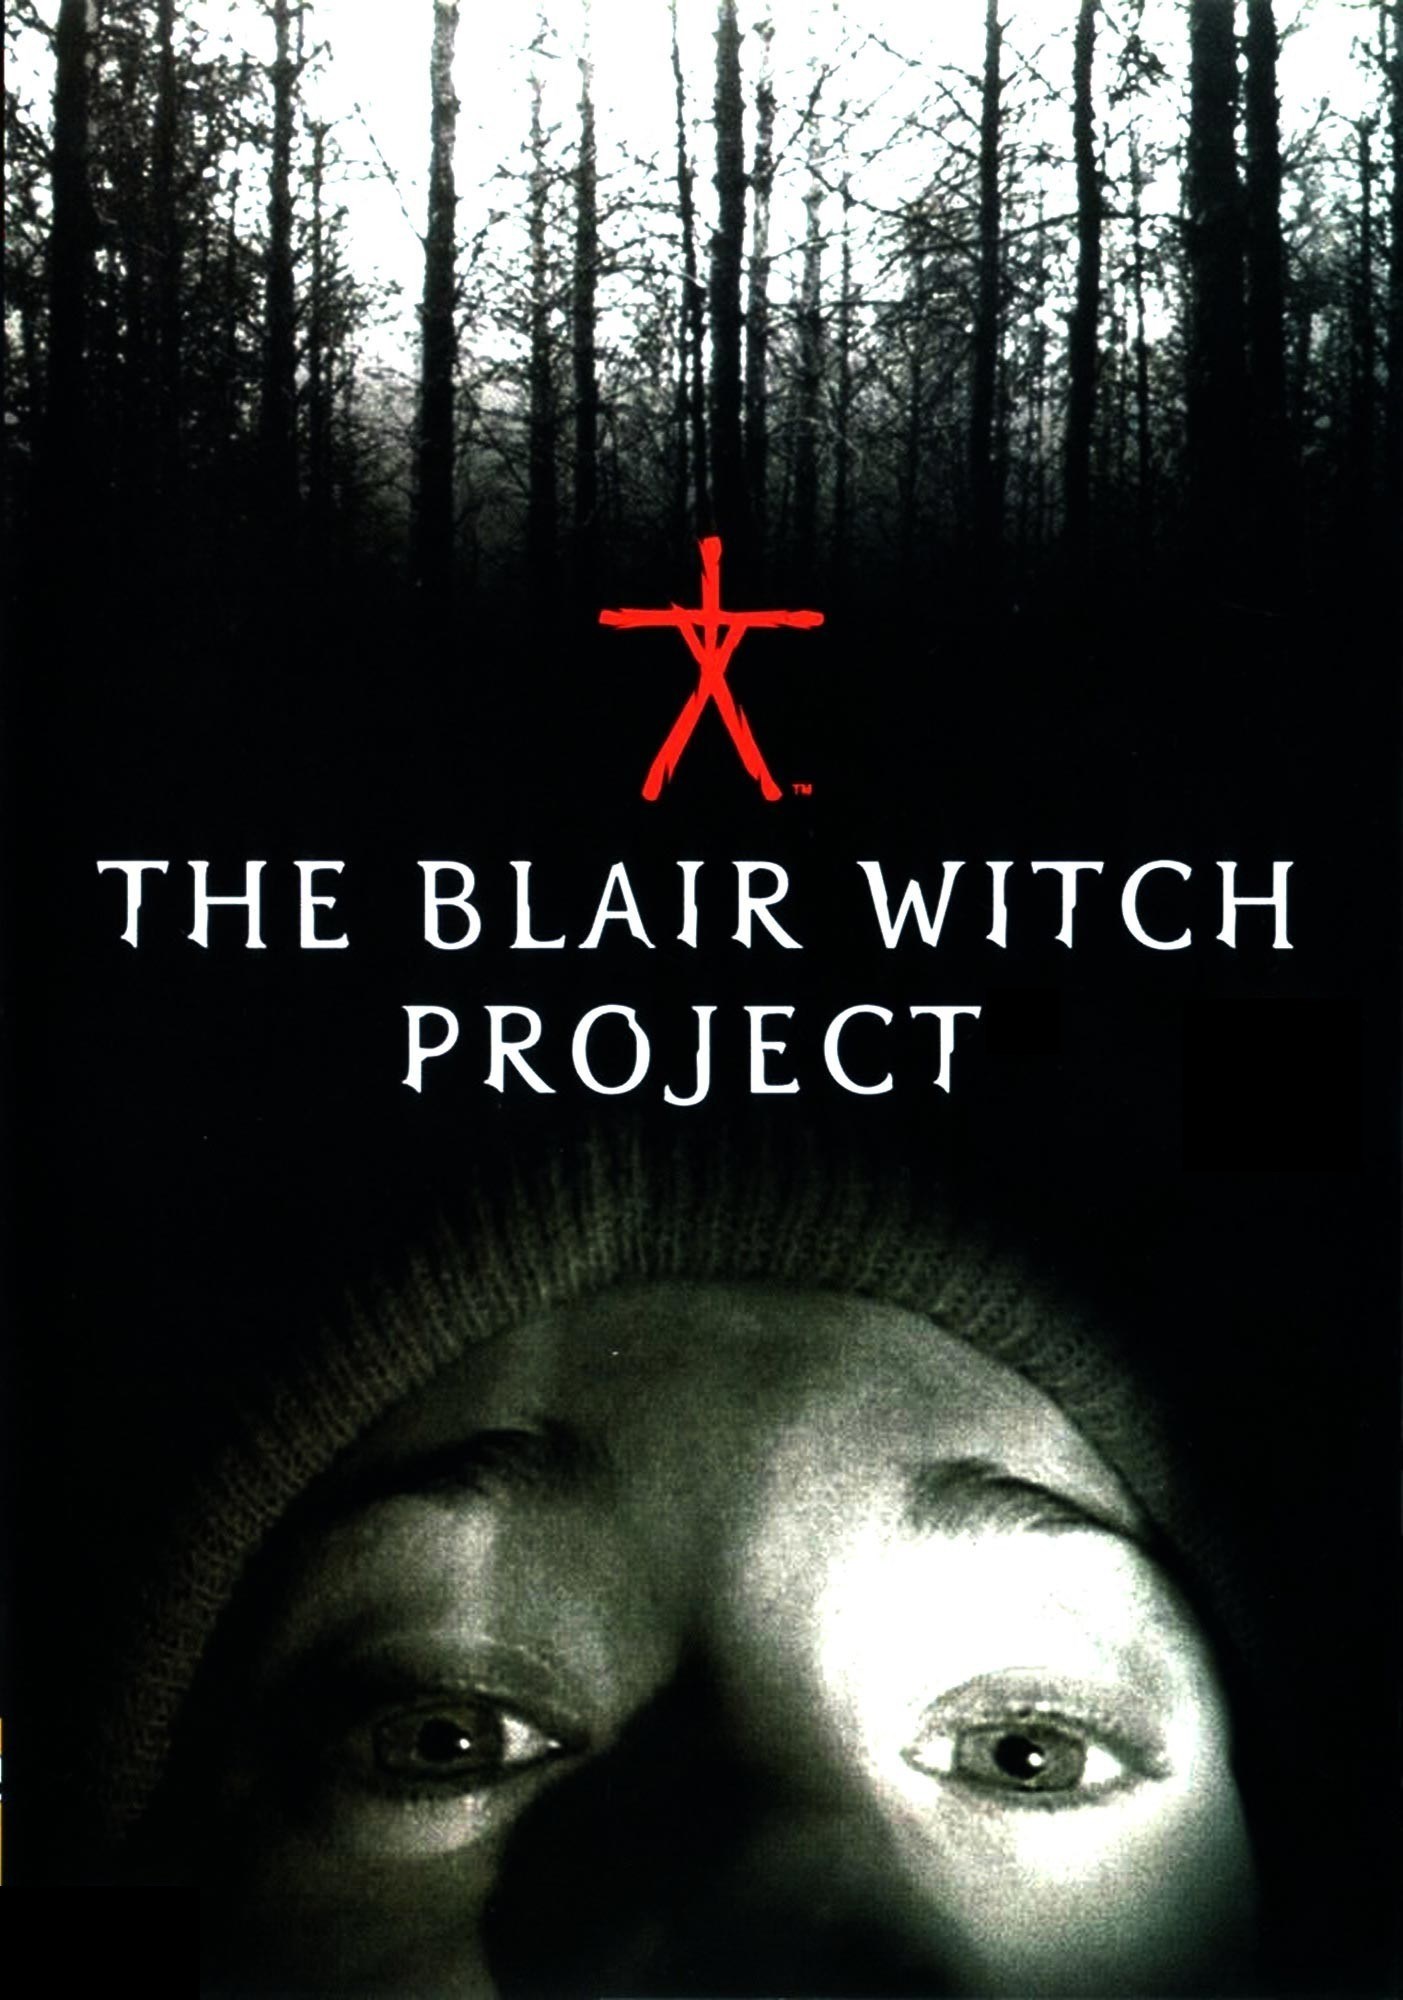 blair witch project 2 download